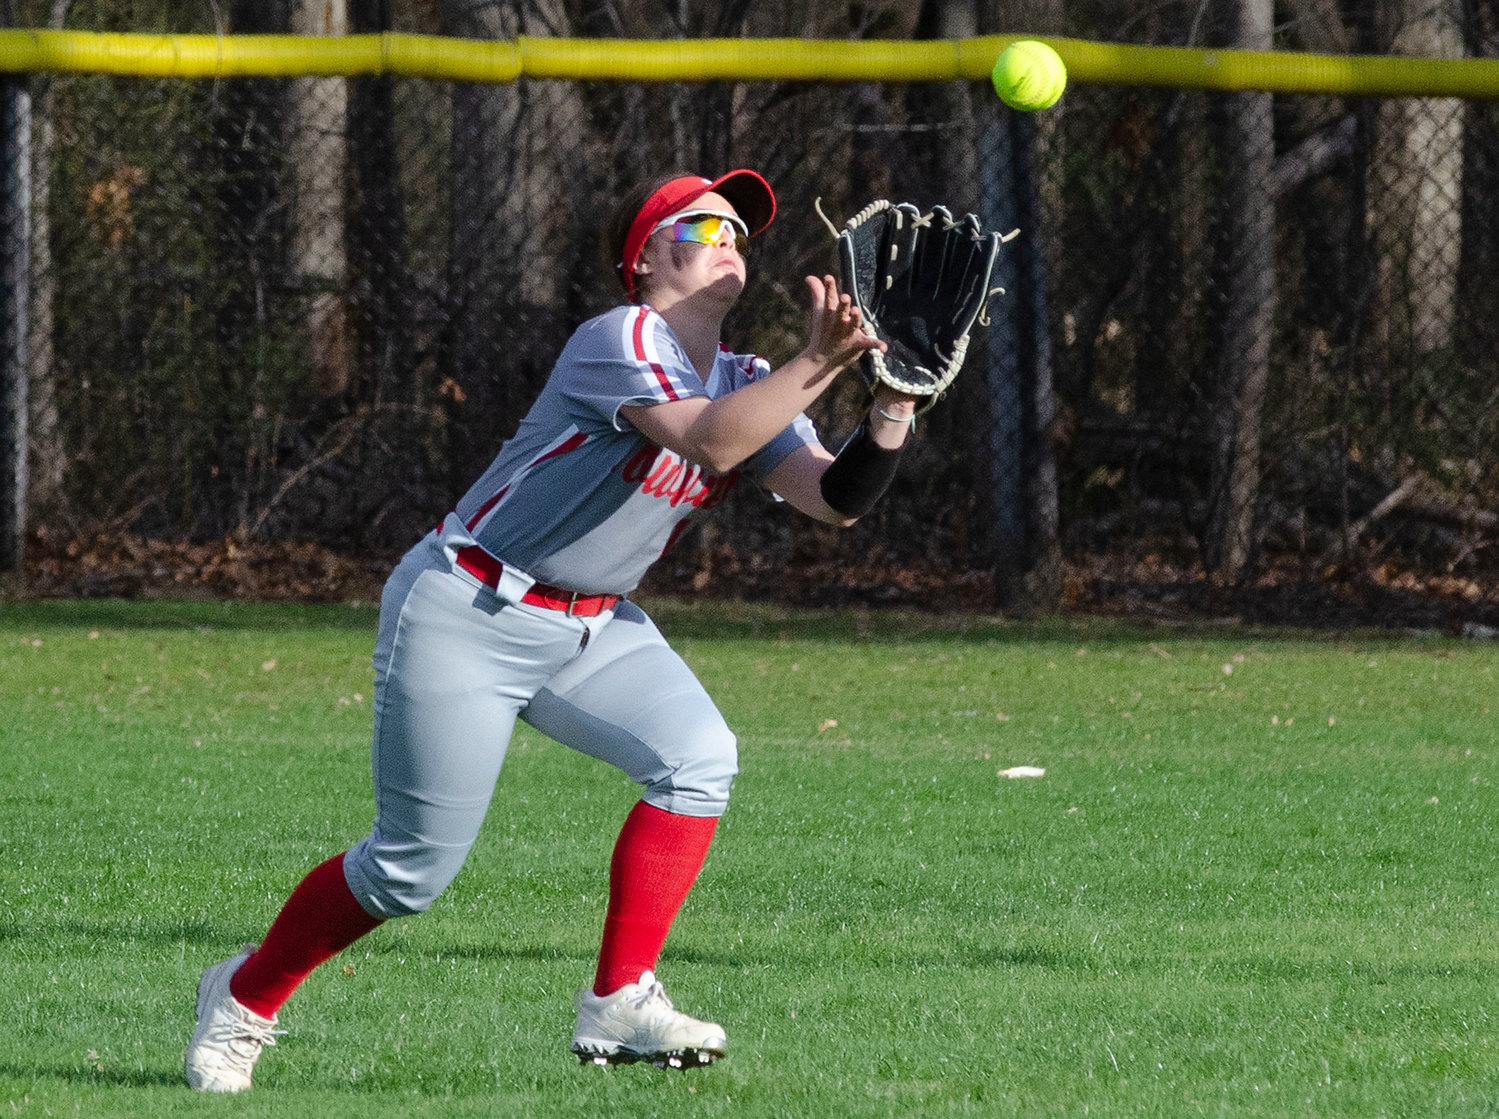 East Providence High School right fielder Abby Hollingworth makes a catch on the run for the Townies during their recent Division I outing at home against Scituate.